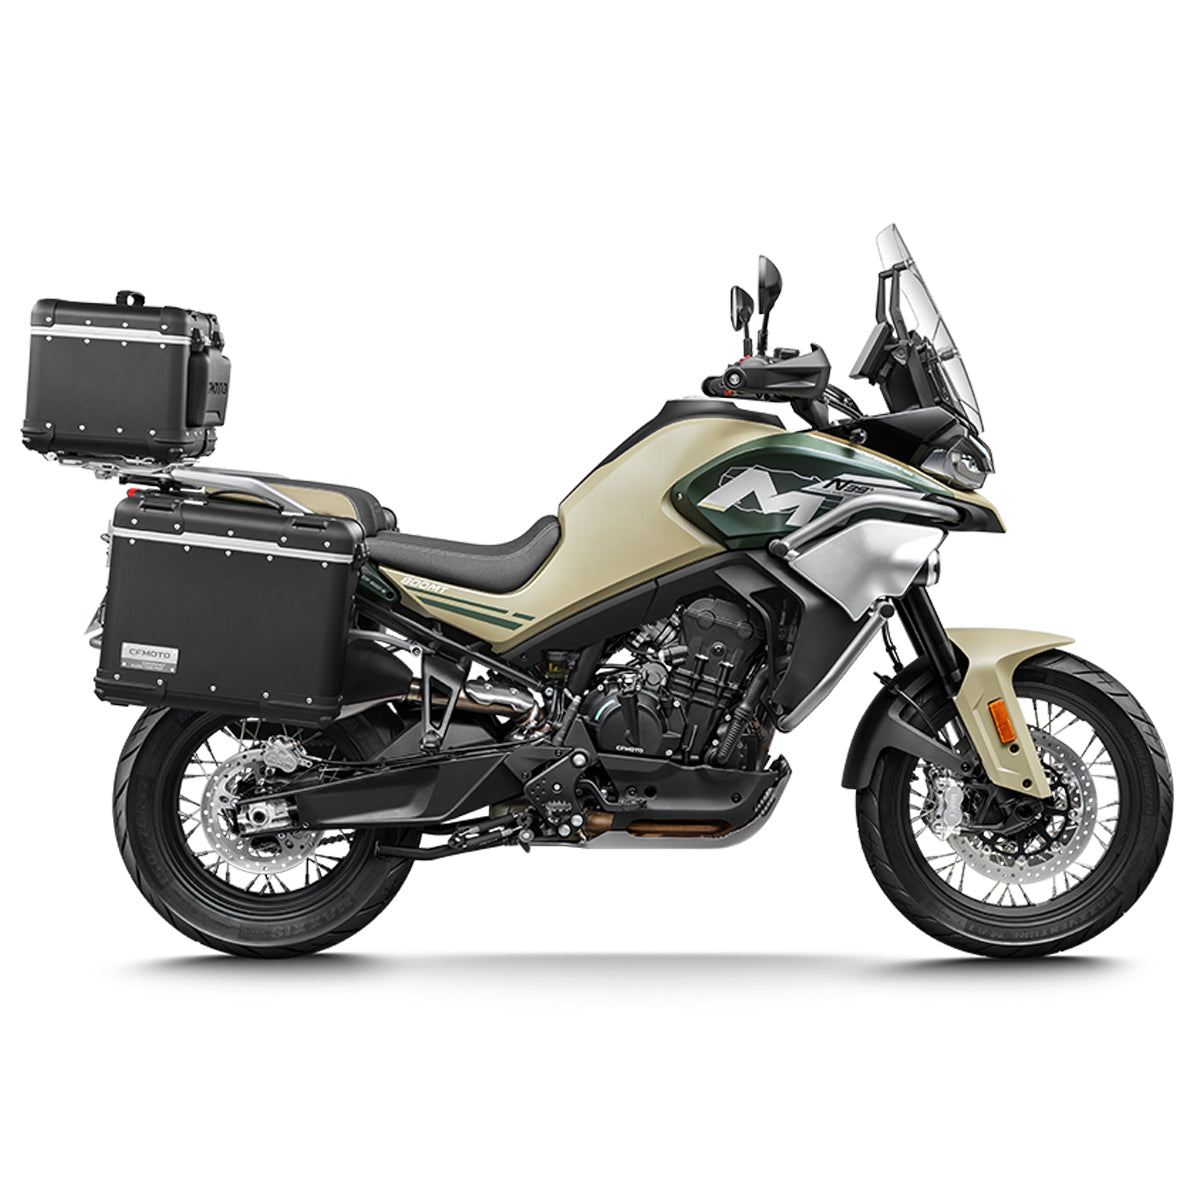 CFMOTO 800MT TOURING LIMITED EDITION